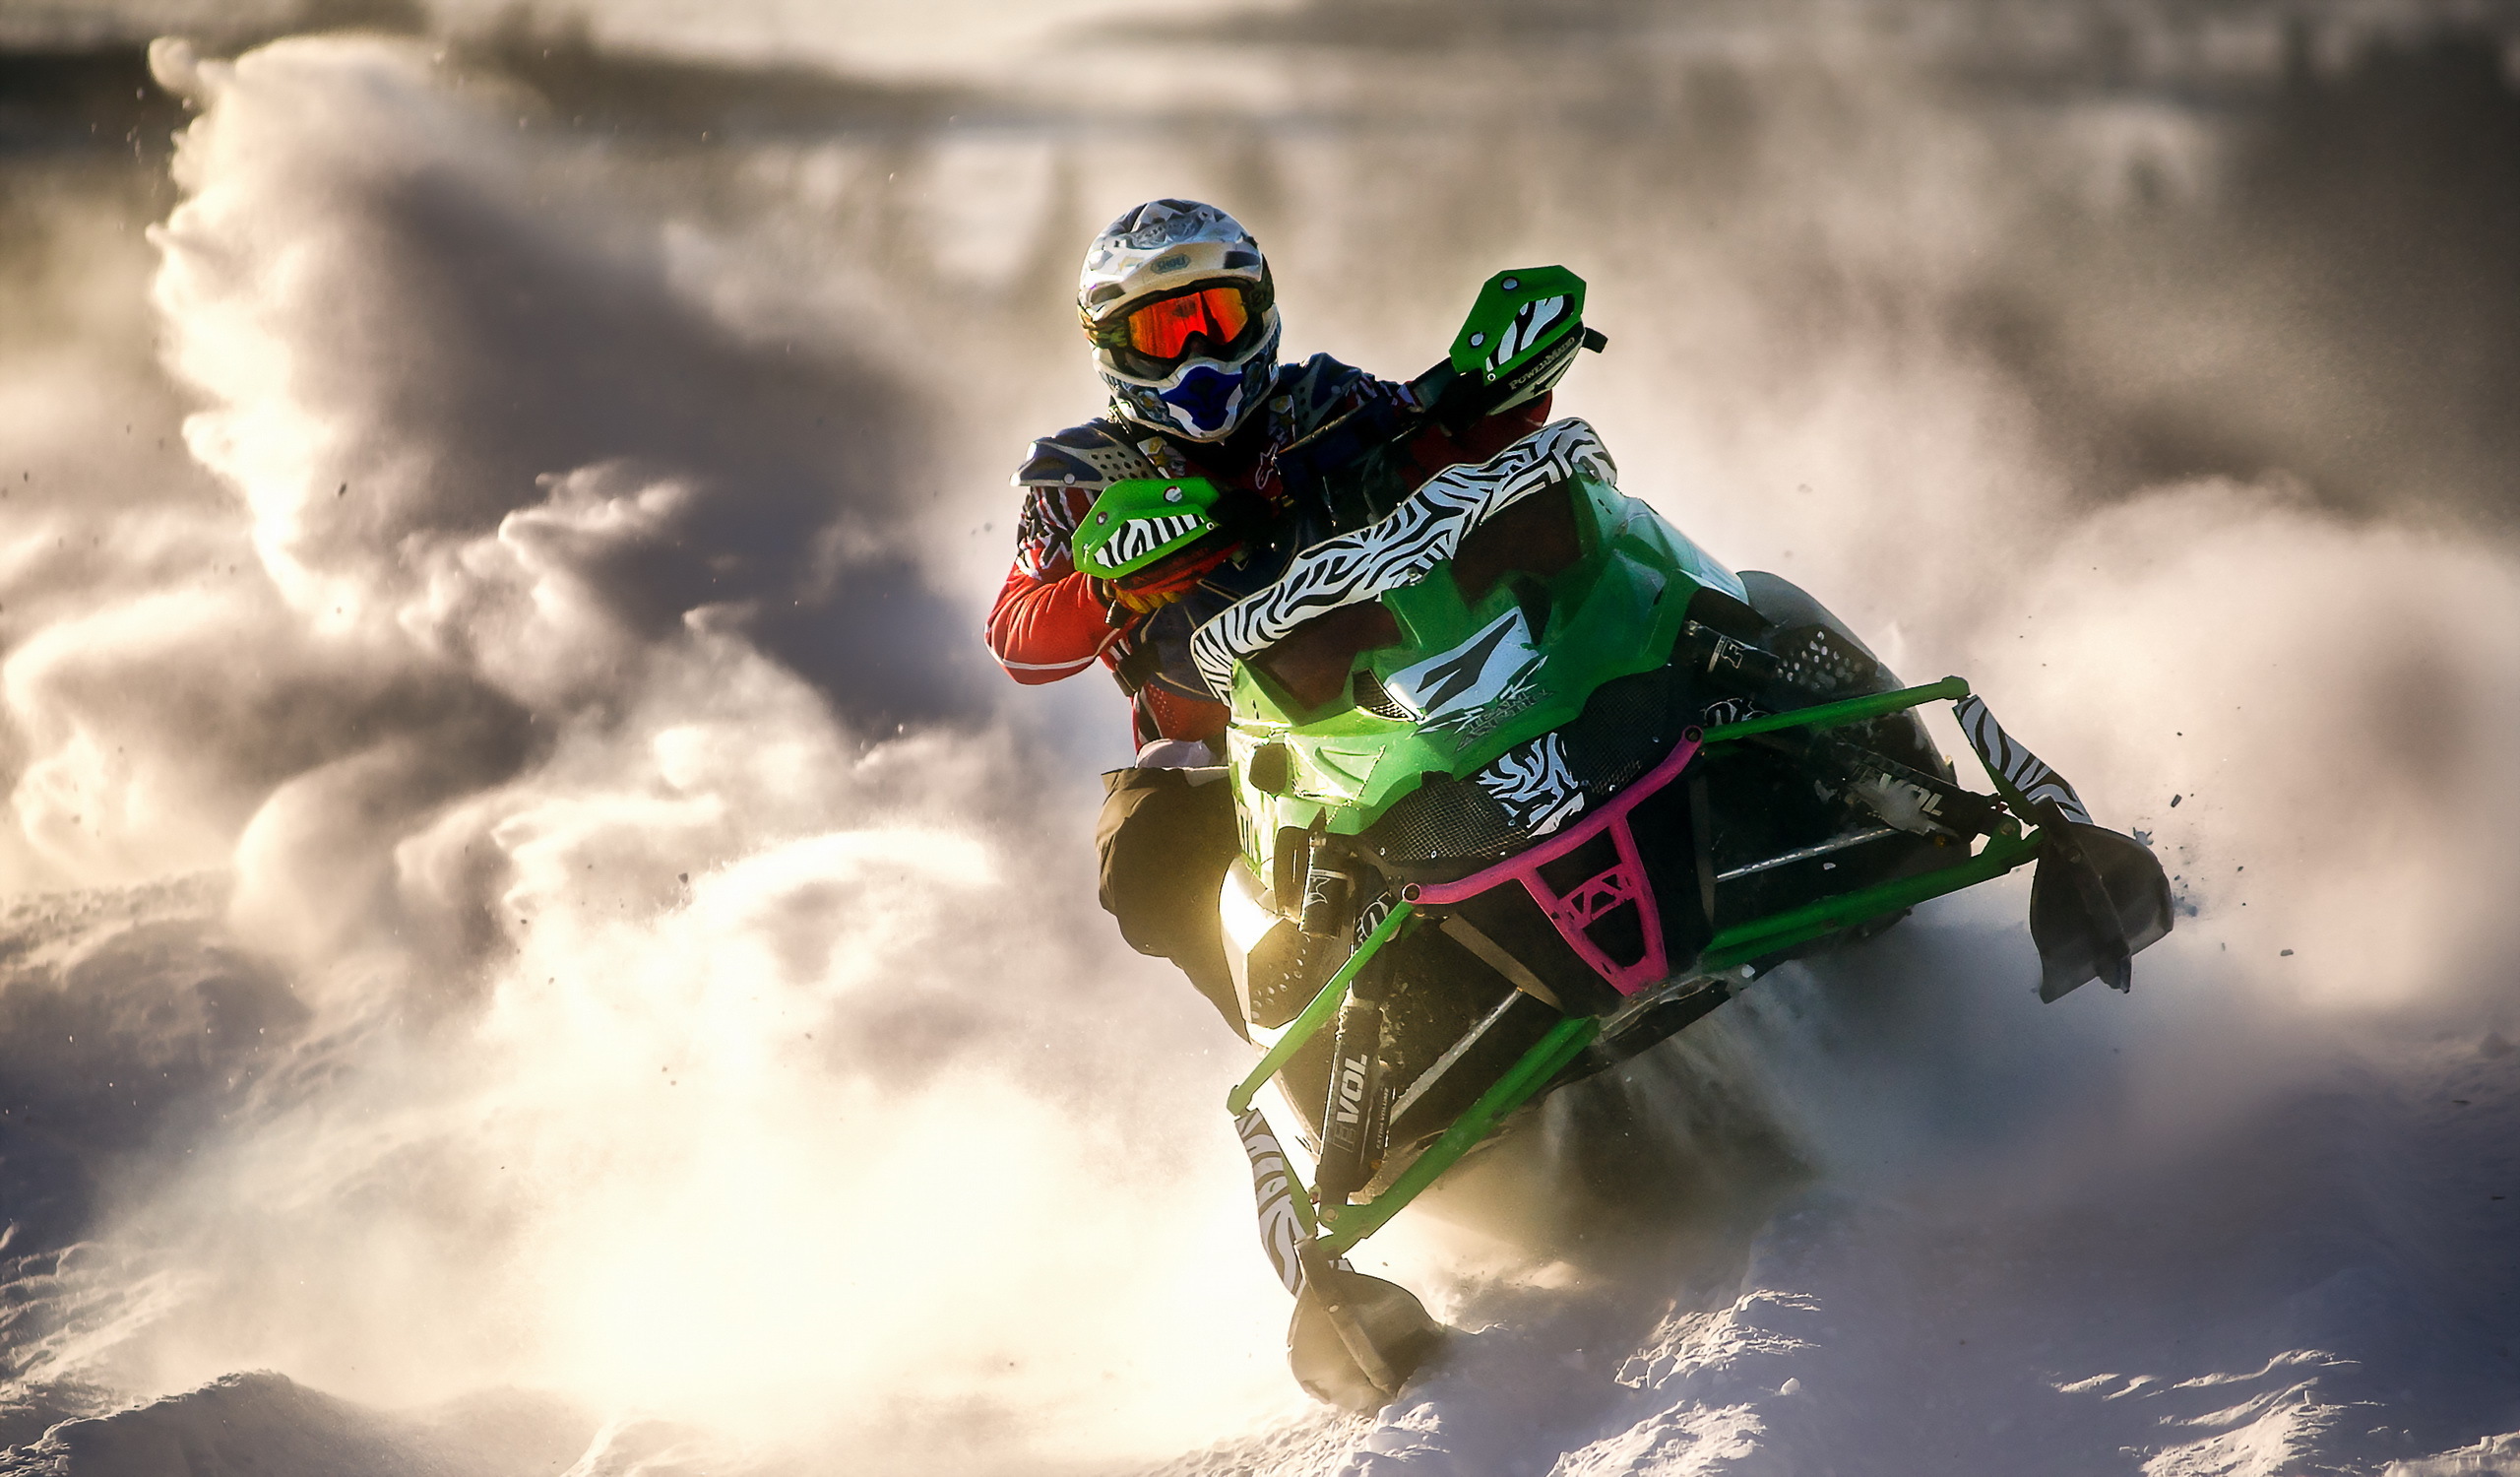  Snowmobile at sunset wallpaper   Wallery